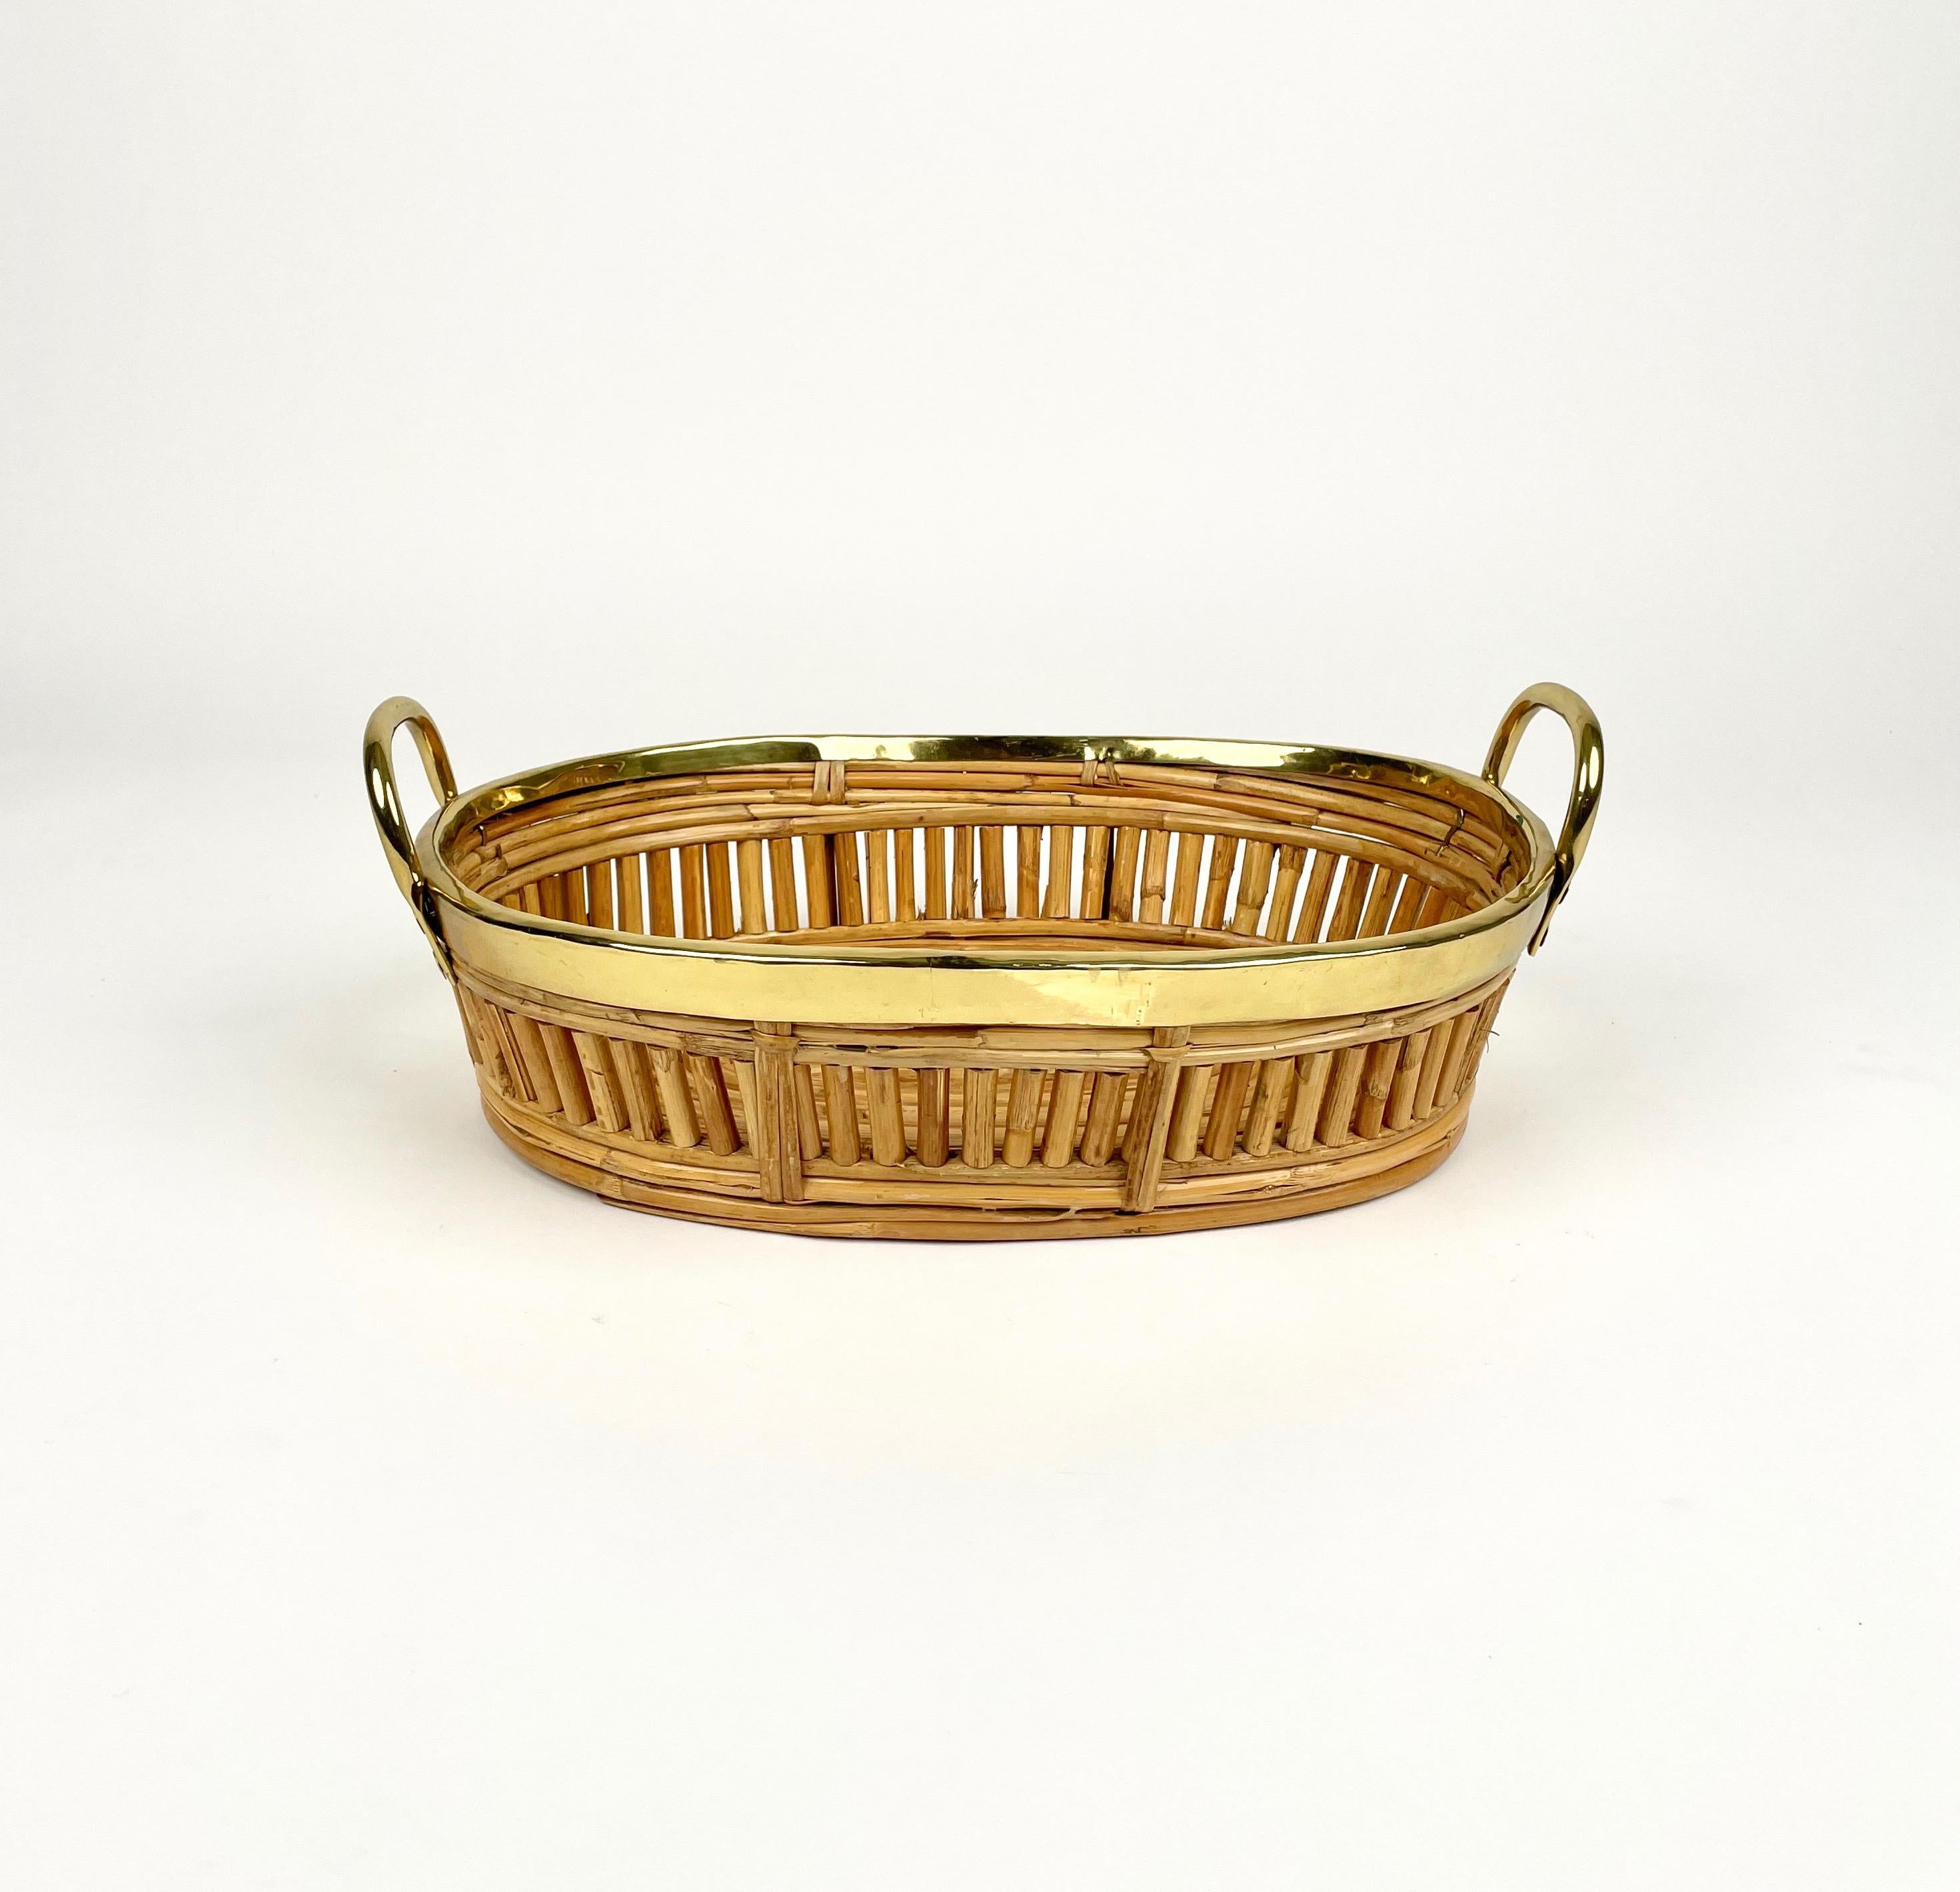 Italian Midcentury Centerpiece Basket Rattan and Brass, Italy 1970s For Sale